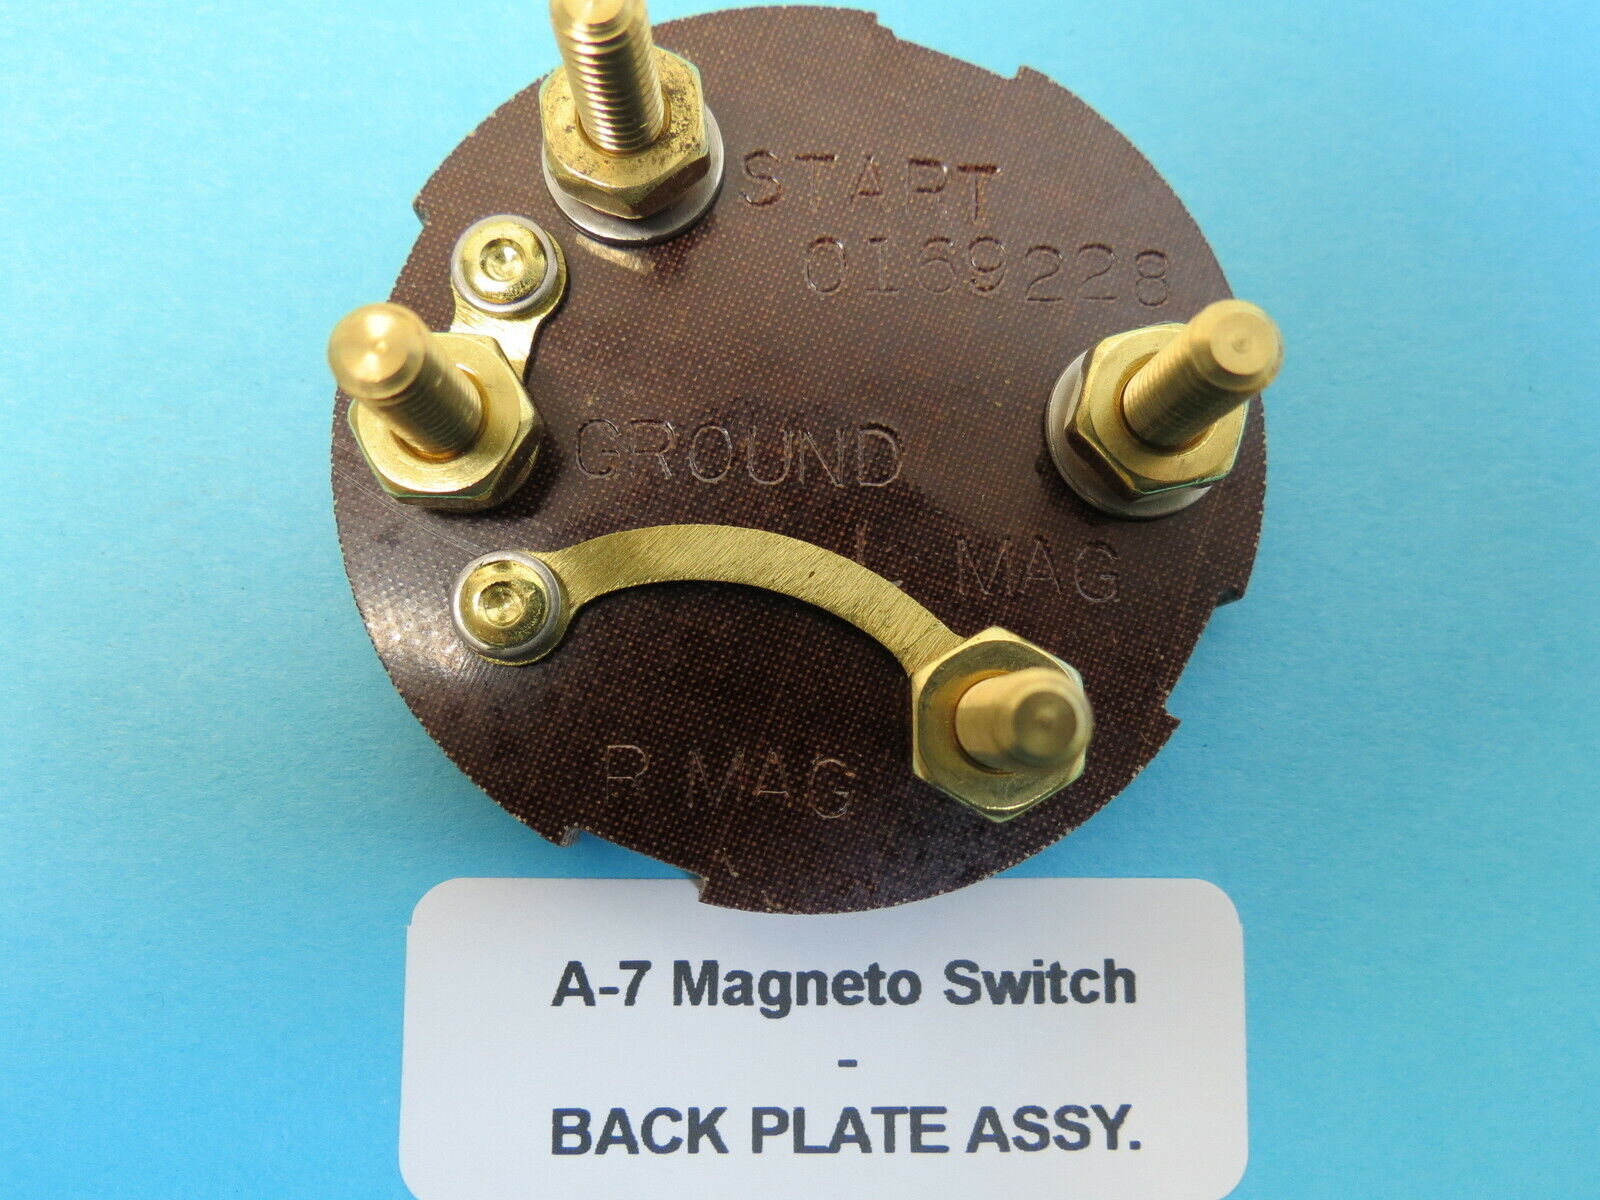 Type A-7 Mag Magneto Switch Replacement Backplate T-6 SNJ Piper Cub Stearman.